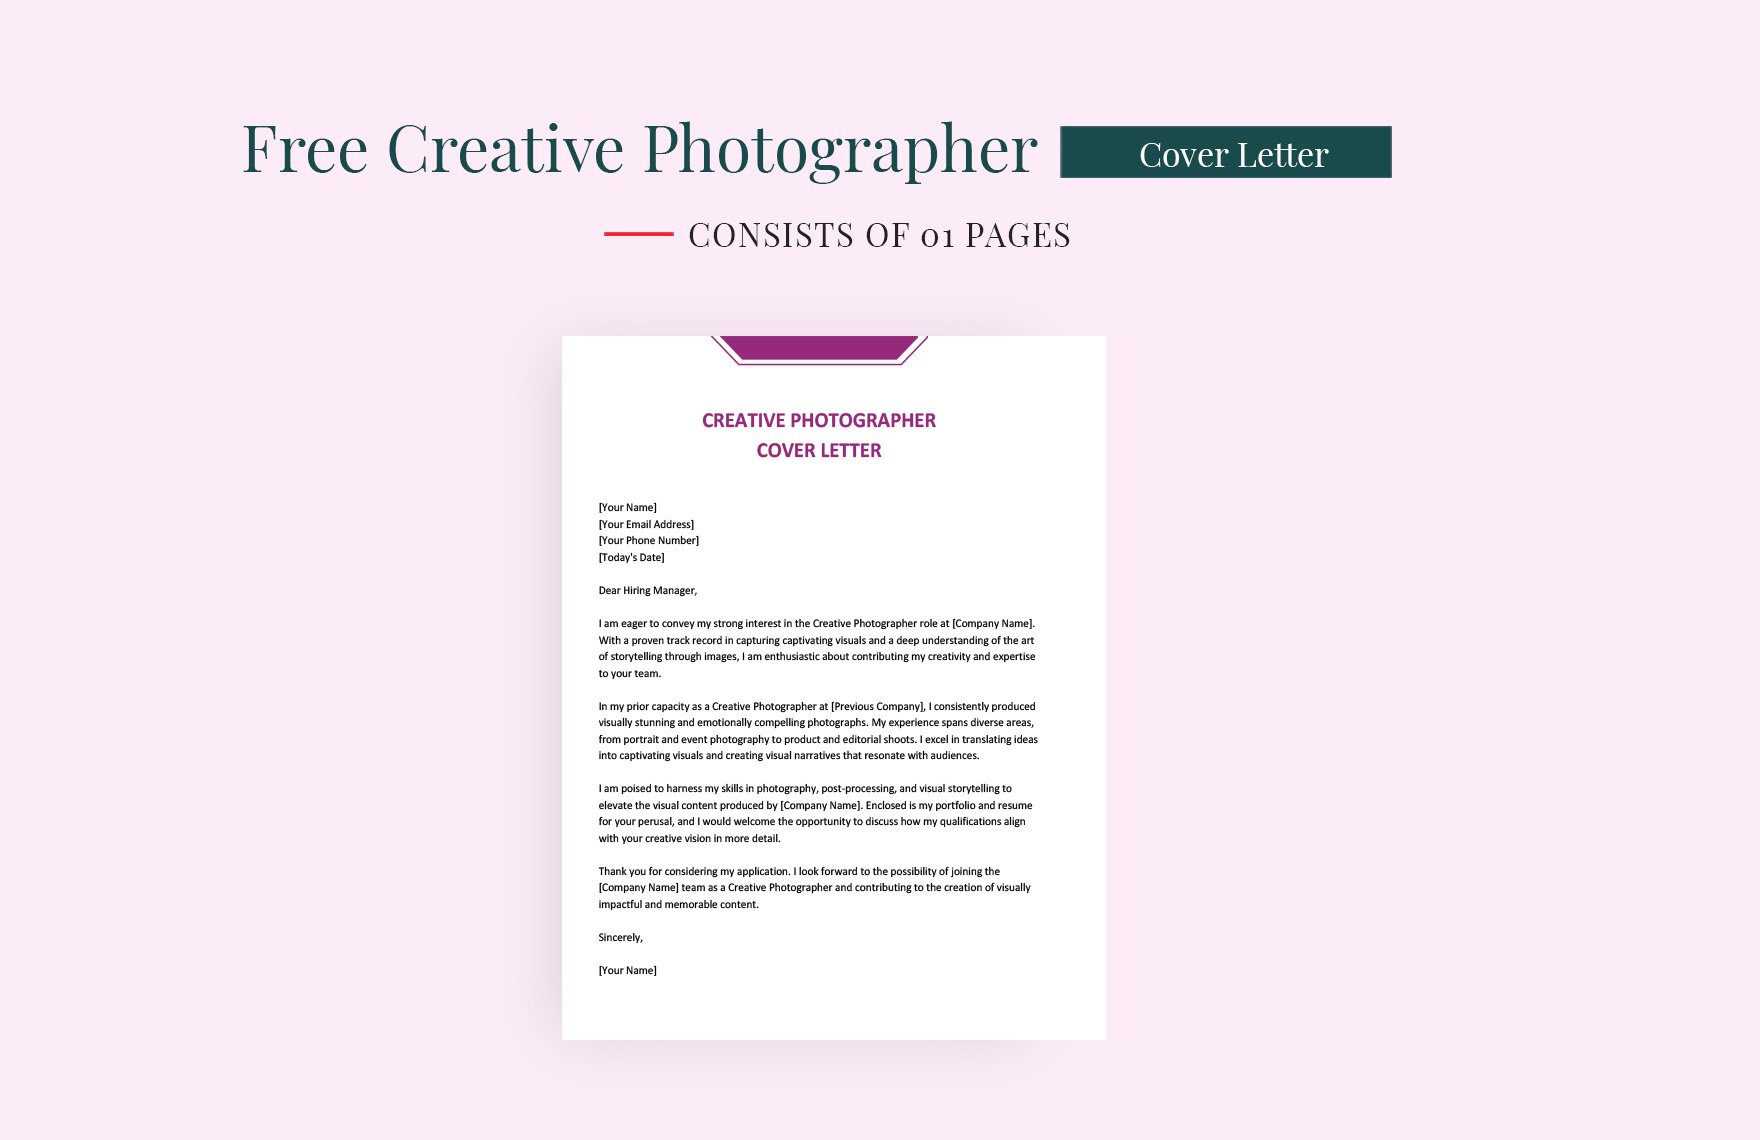 Creative Photographer Cover Letter